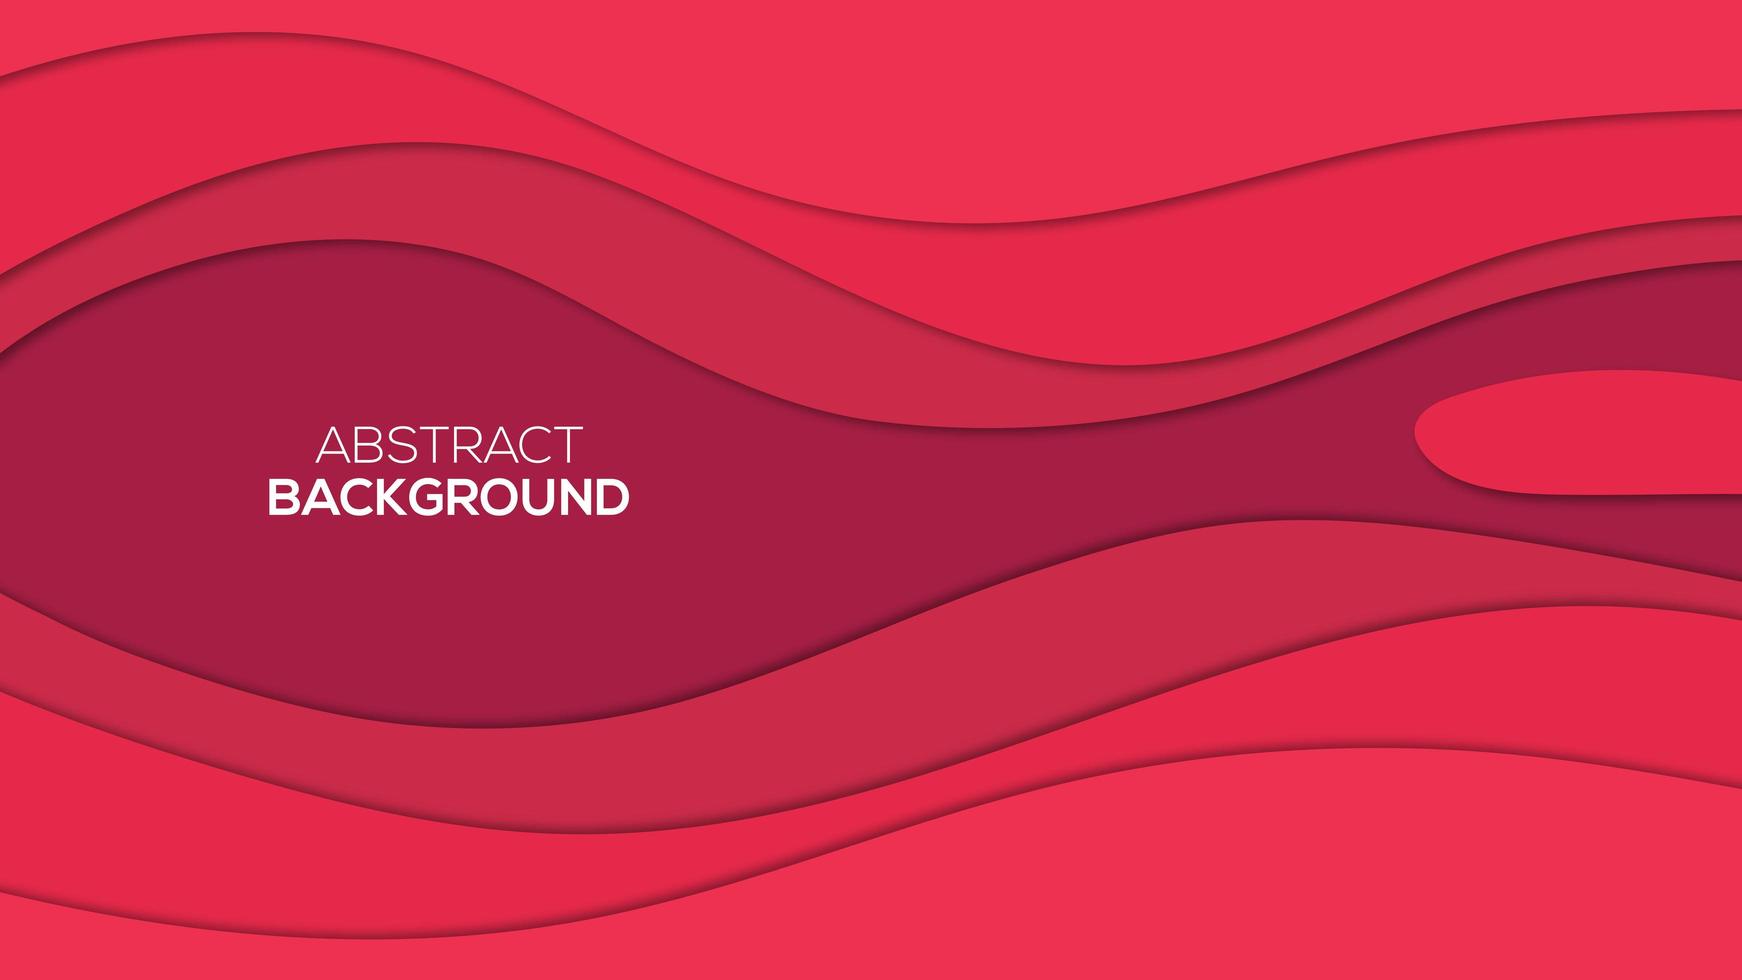 Maroon and red fluid Background vector